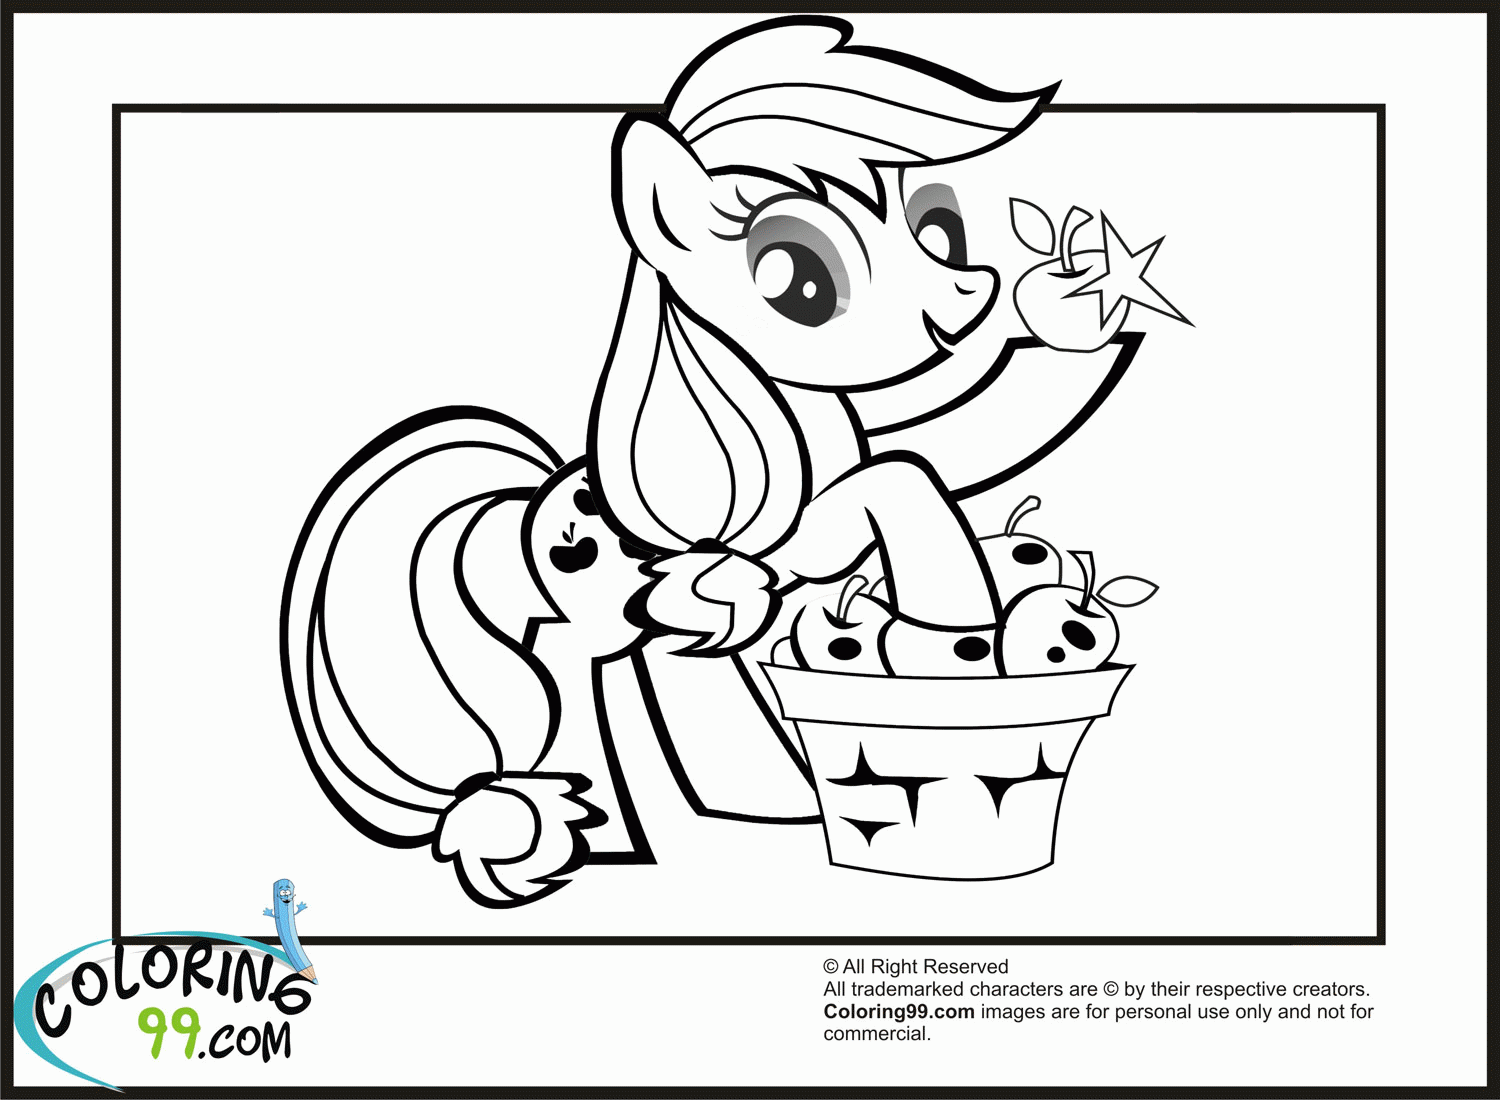 Applejack Pony - Coloring Pages for Kids and for Adults